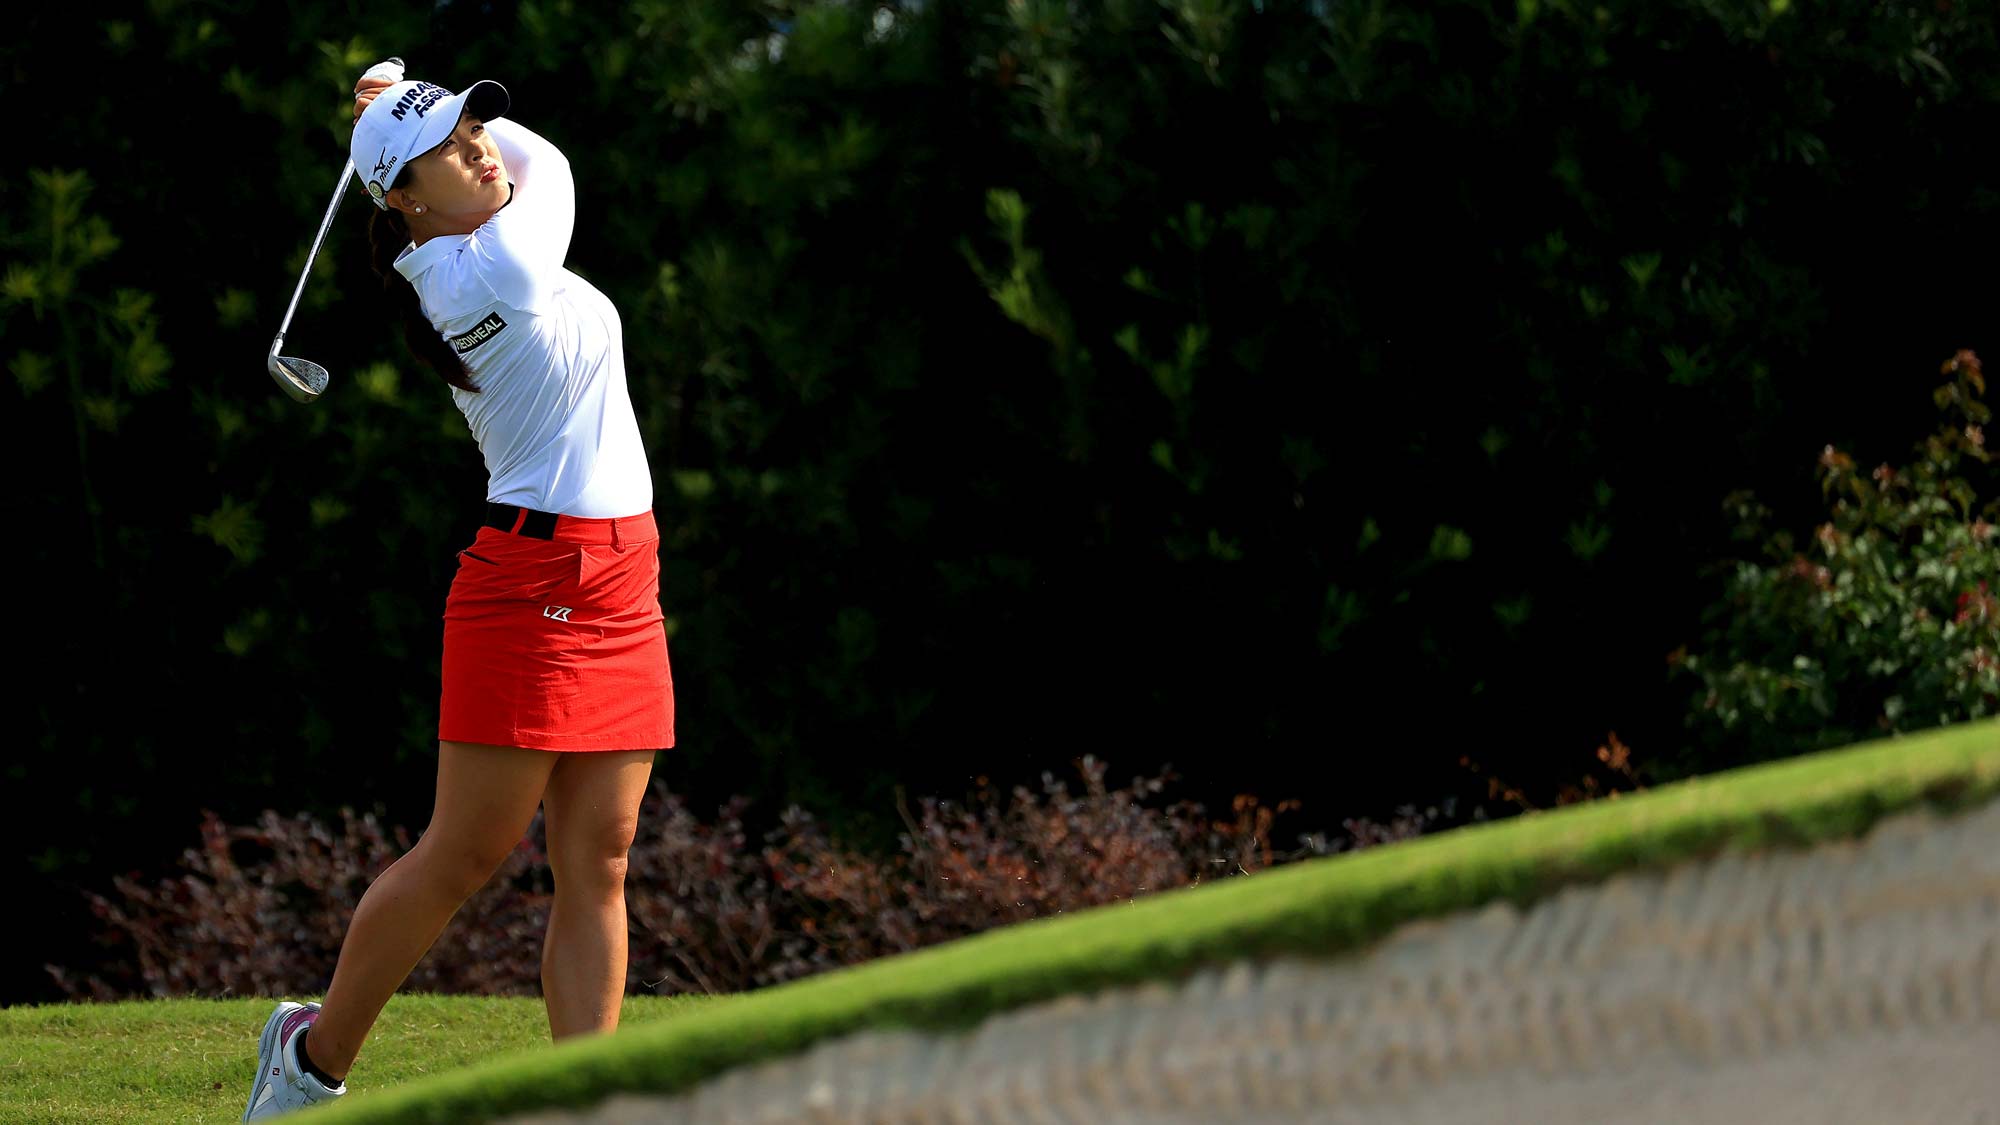 Sei Young Kim of Korea hits her approach shot on the second hole during the final round of the Pelican Women's Championship